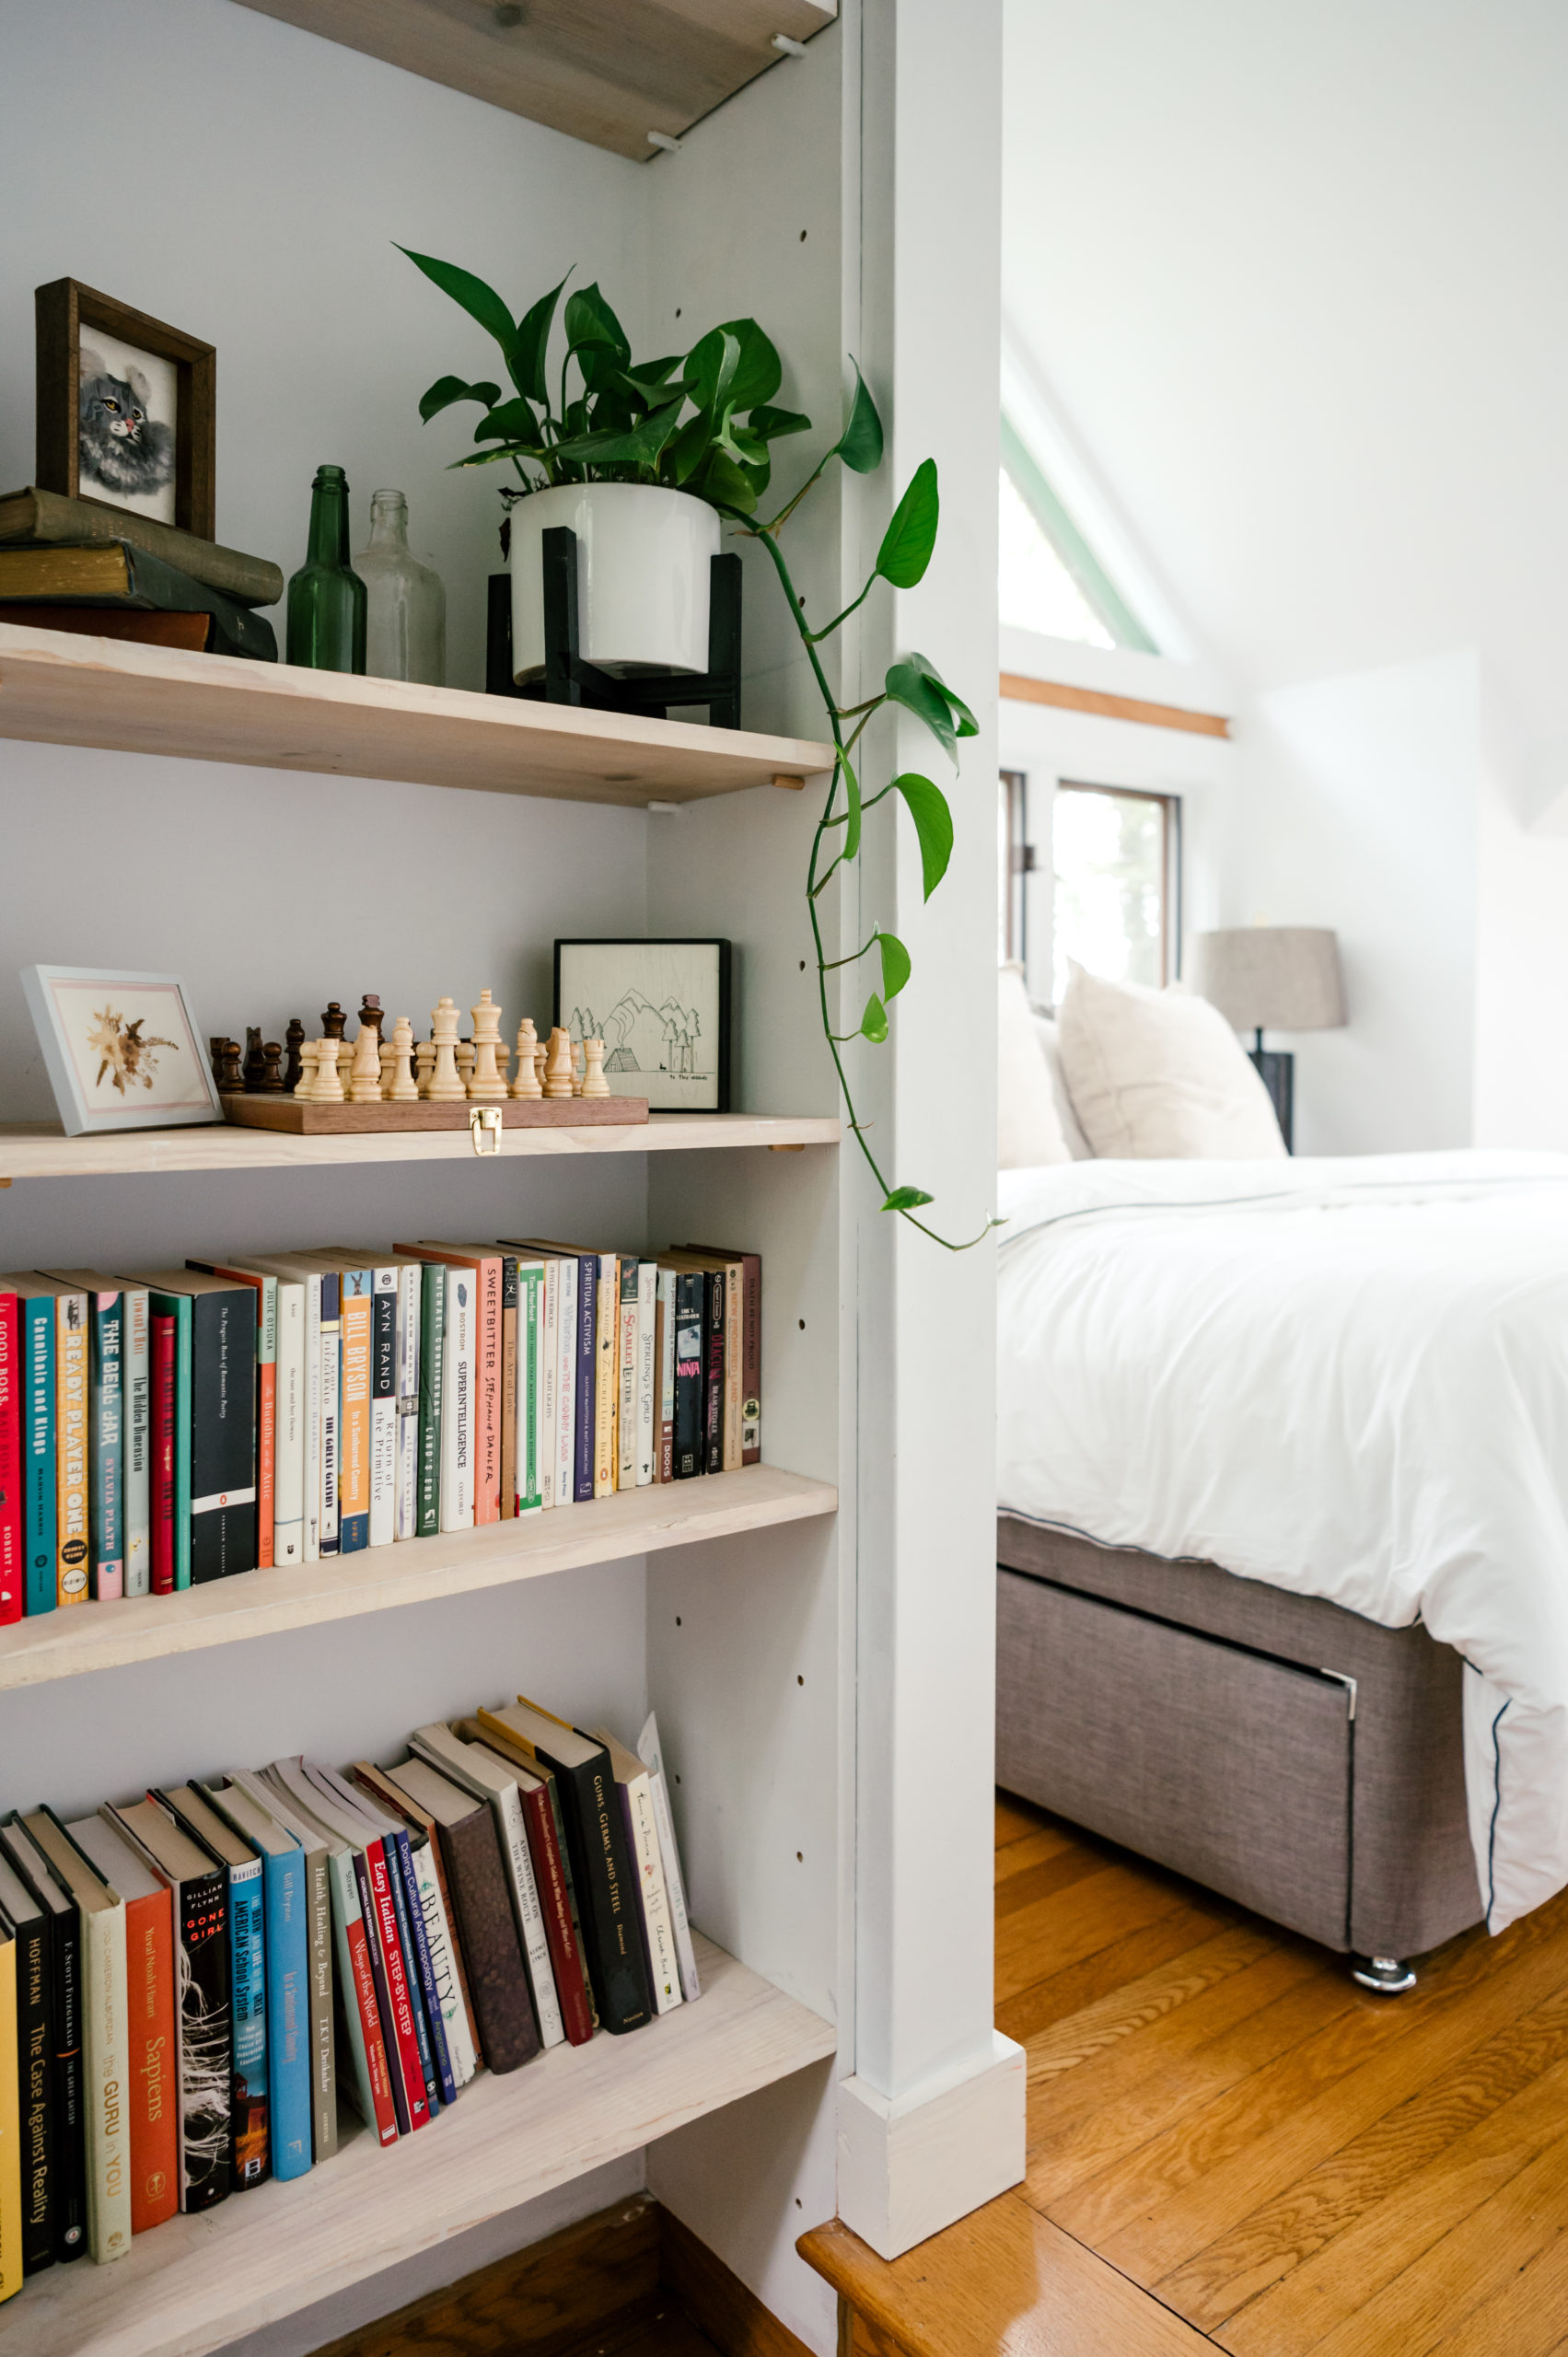 Photo of bedroom interior decor such as books and a chess board sitting on the shelves, and bed with white cover in the background